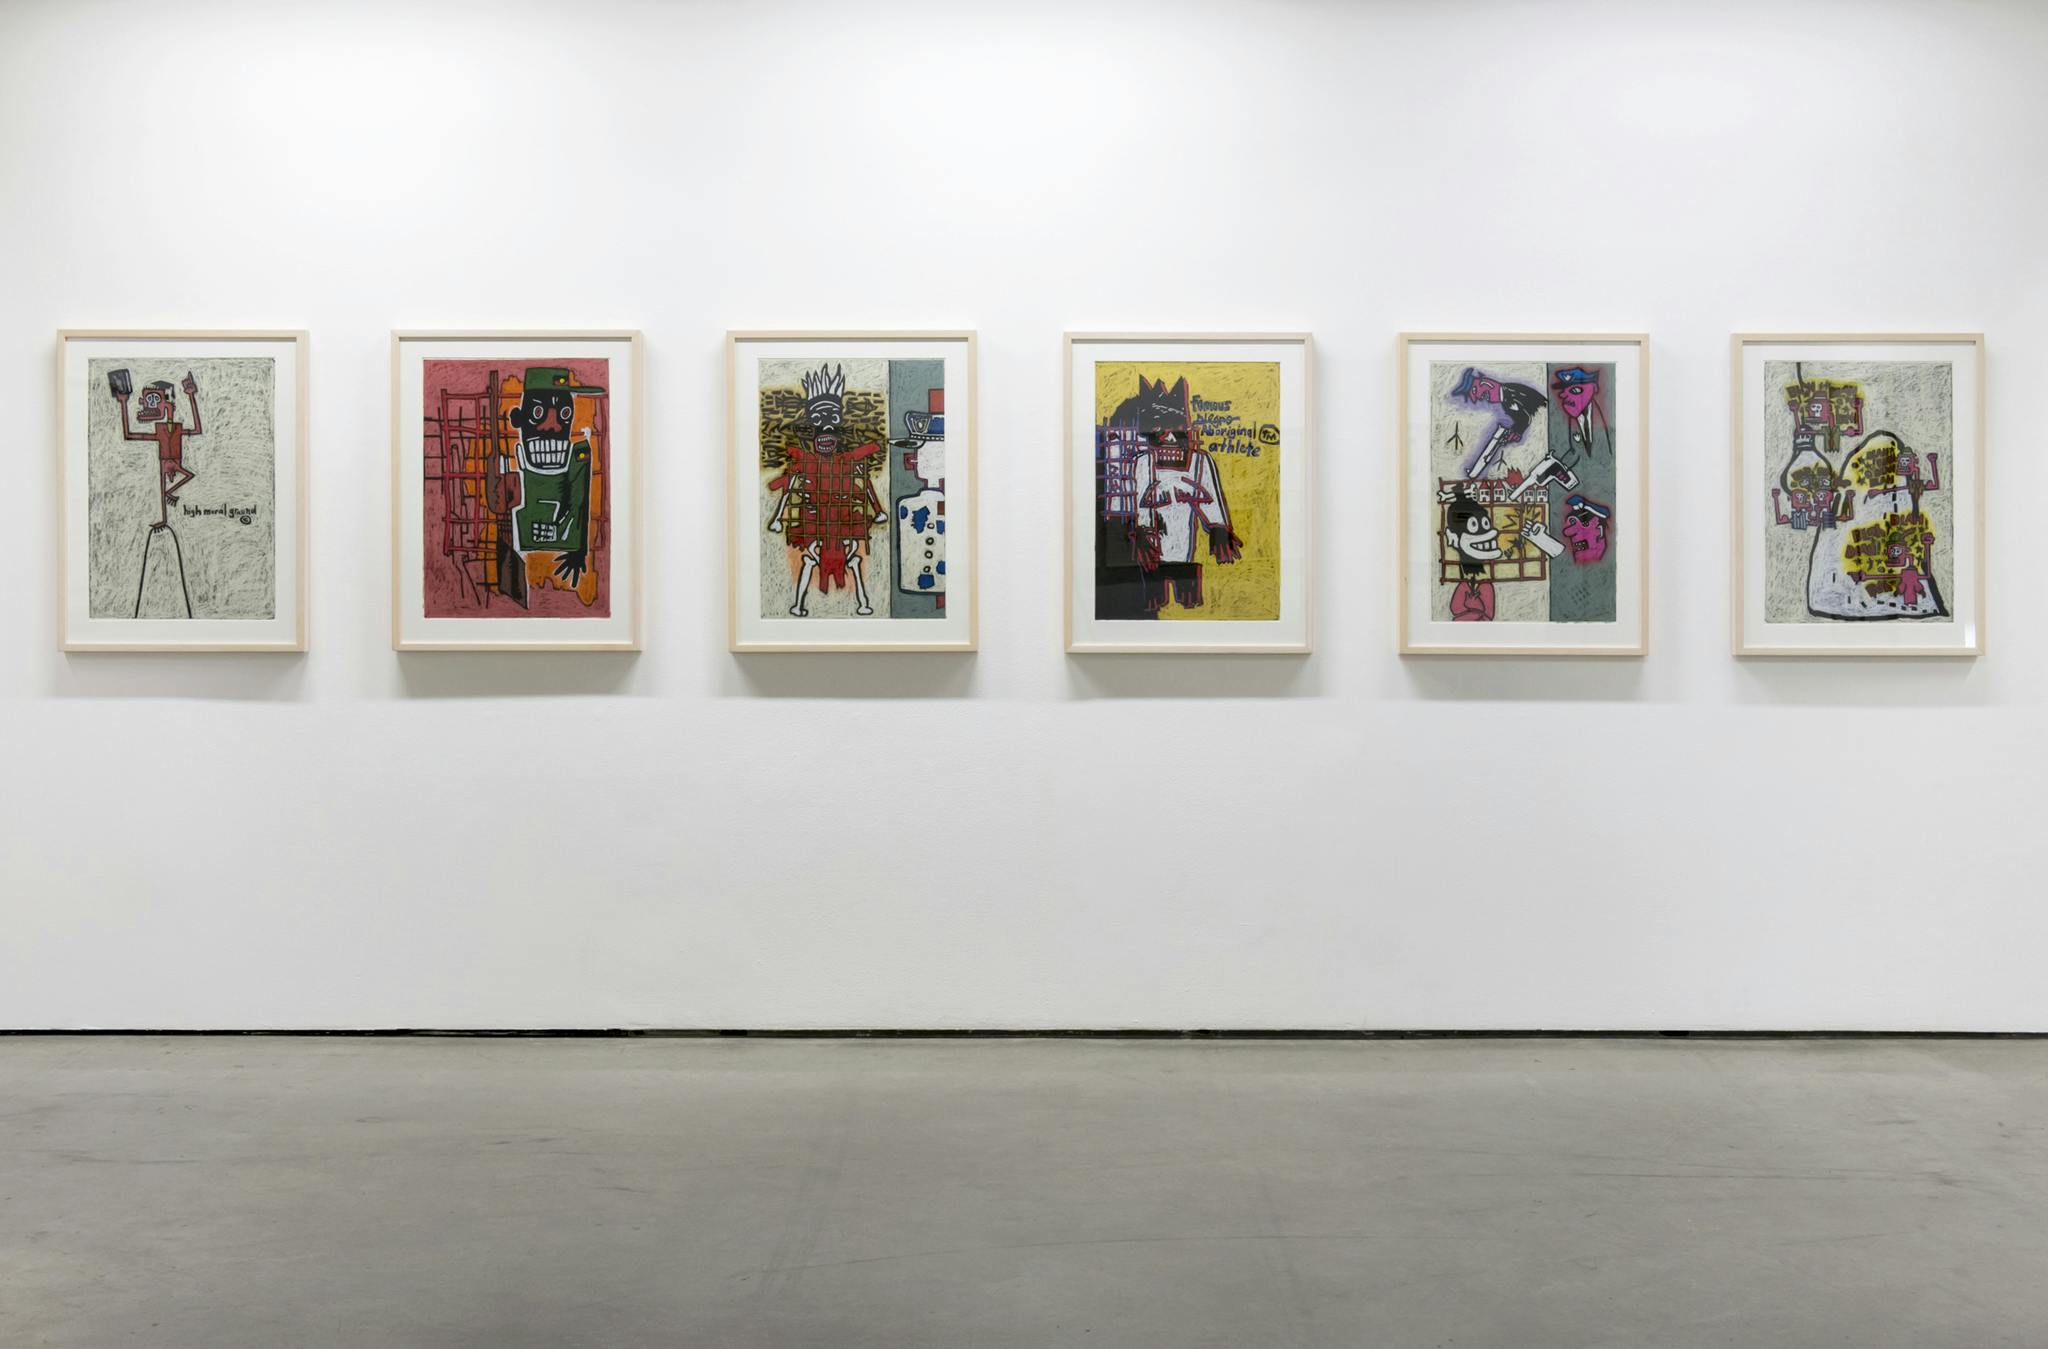 Six framed works on paper hang in a horizontal line on the wall of a gallery space. Each illustration has abstract figures depicting various violent scenes. 